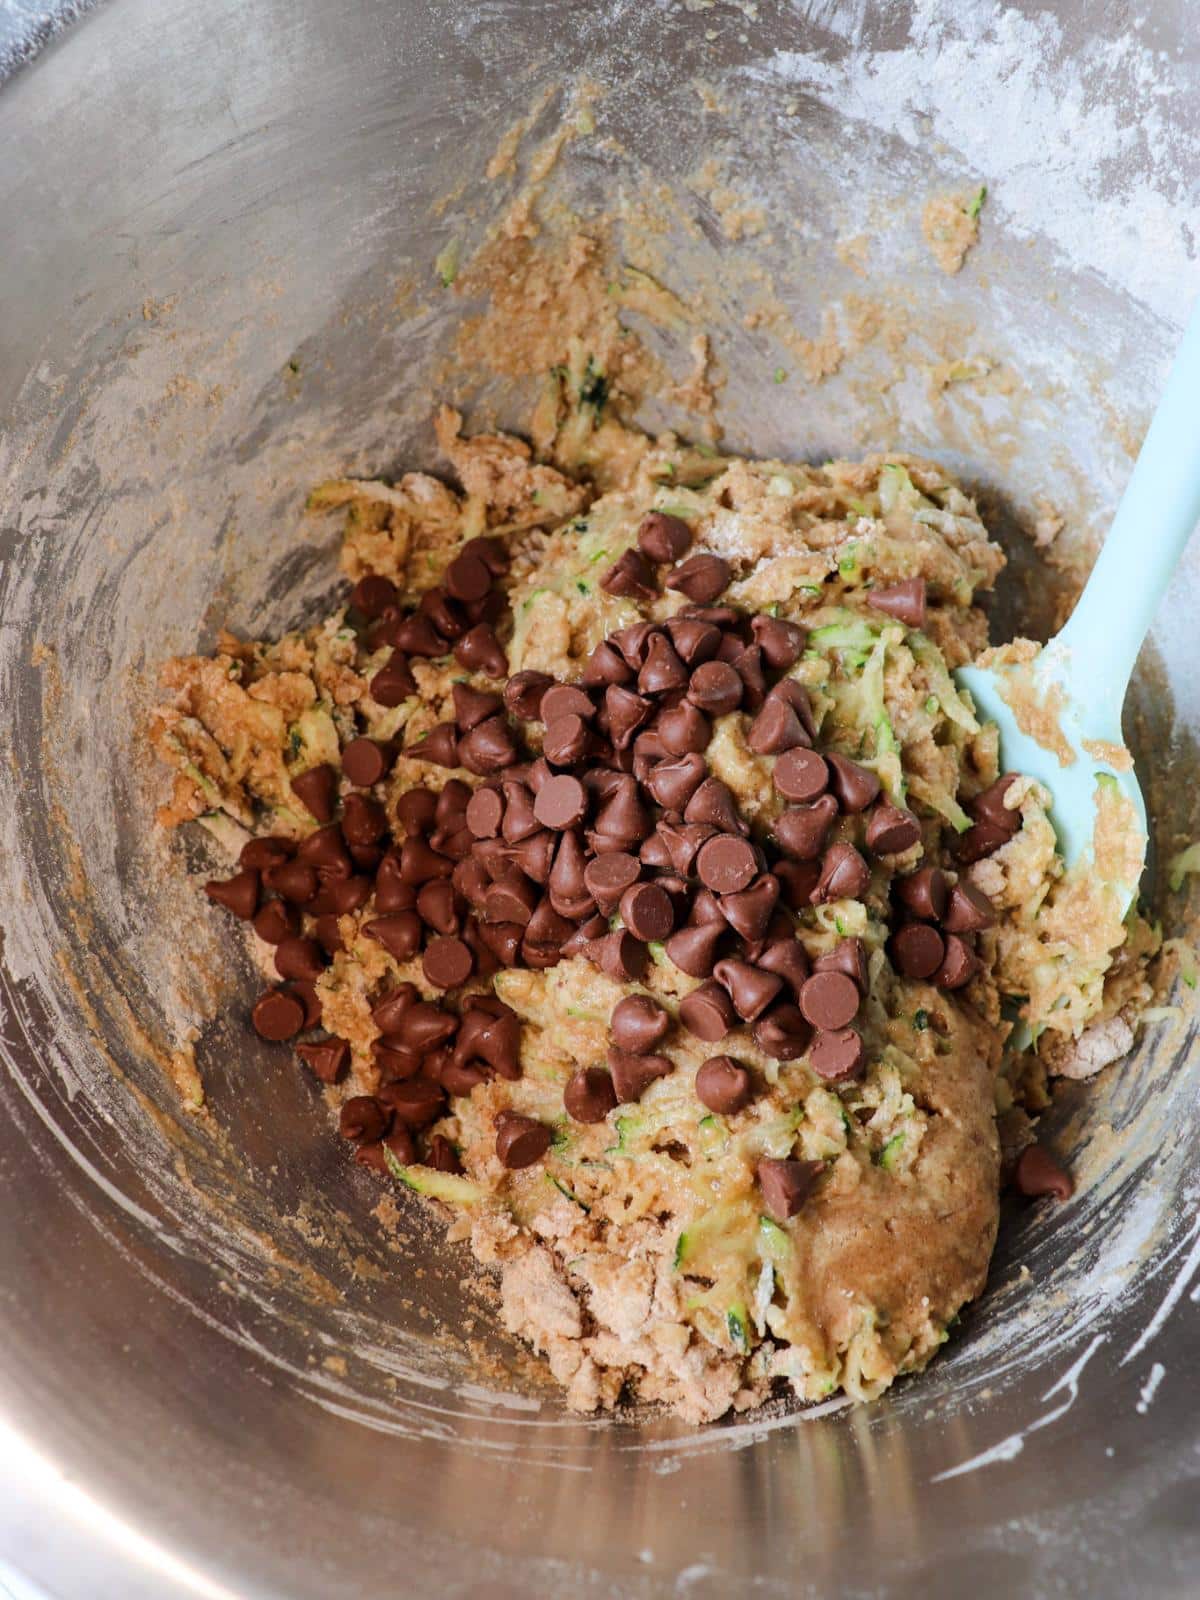 Batter for egg free zucchini muffins in a mixing bowl.